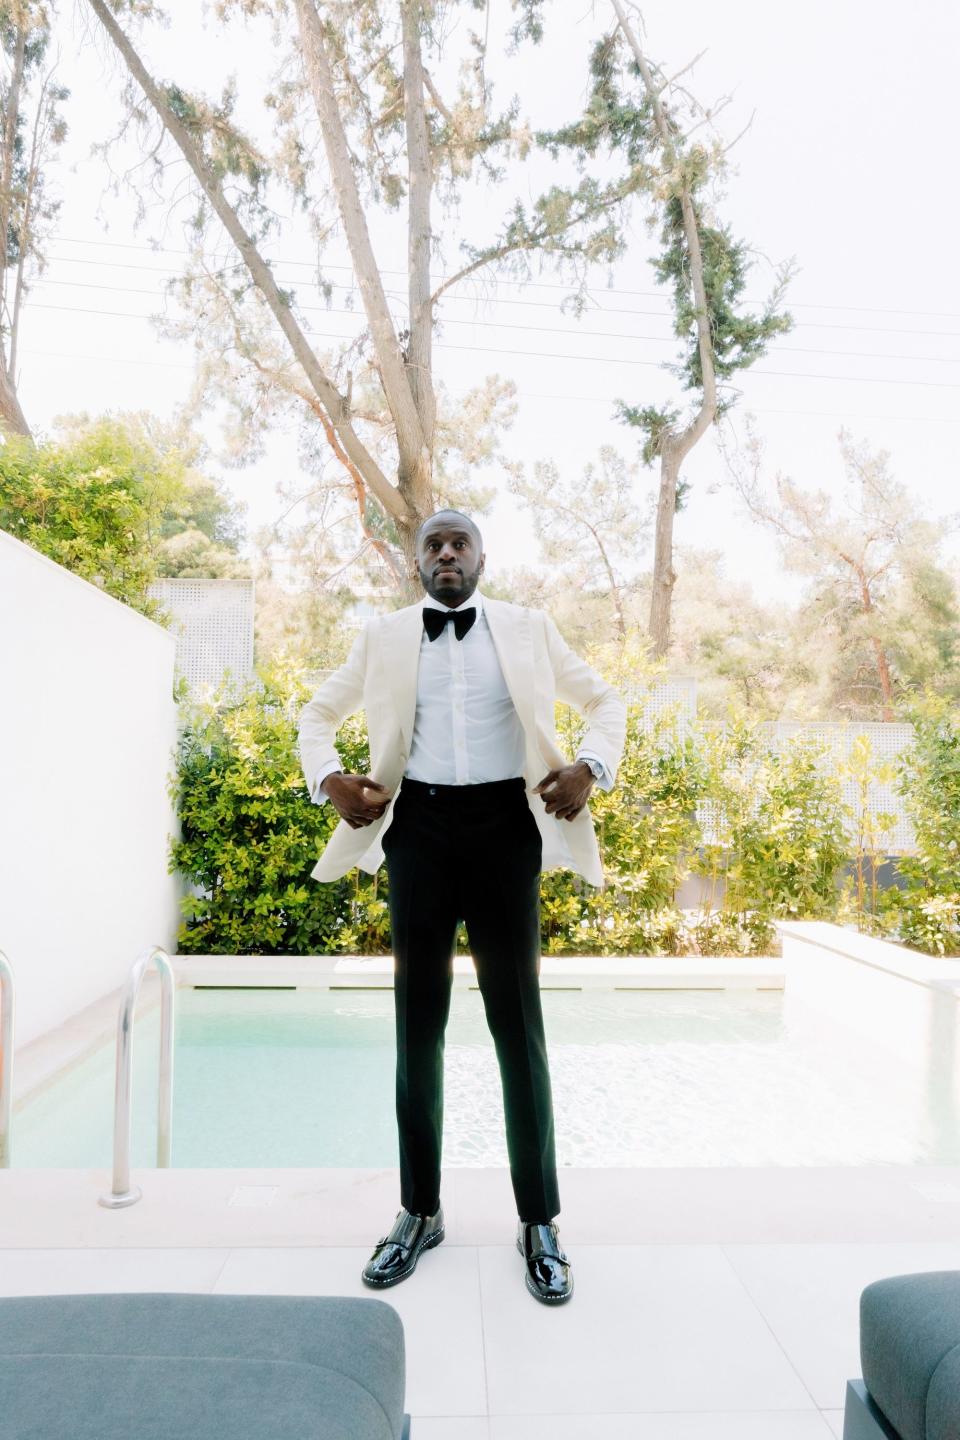 A man in a white tuxedo jacket and black pants stands in front of a pool.